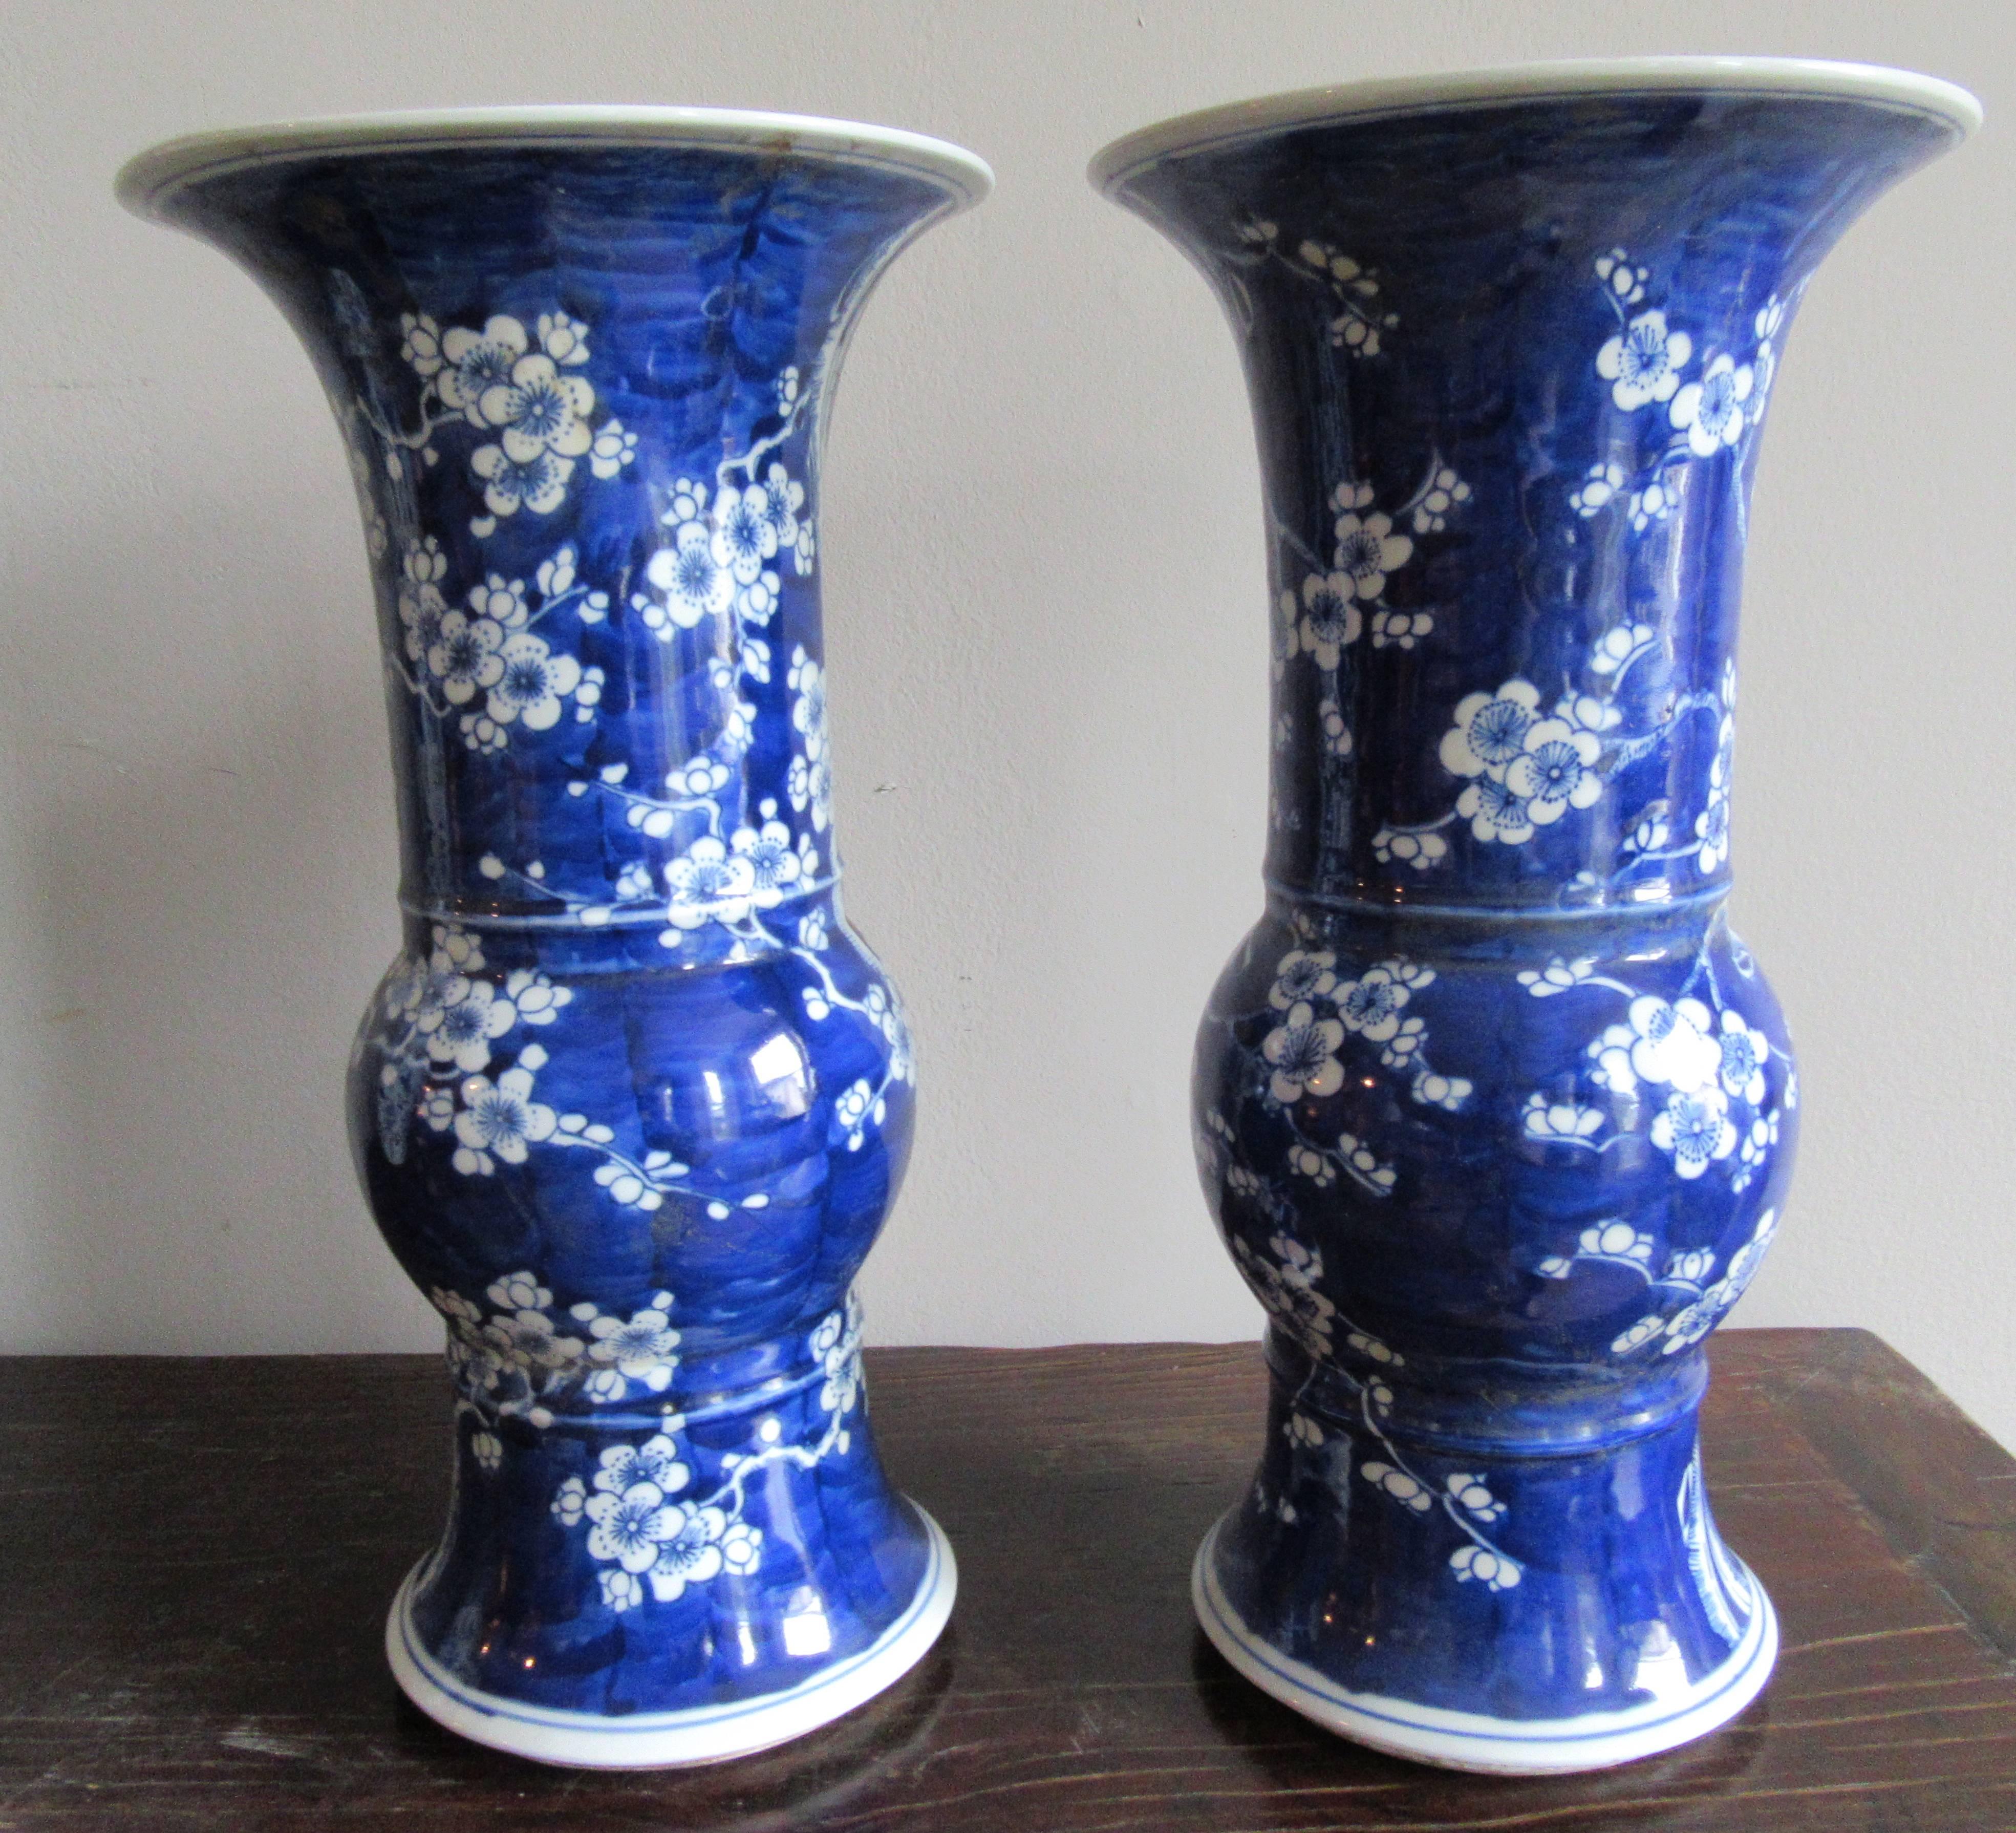 Chinese Export Pair of Chinese Blue & White Porcelain Baluster Vases with Cherry Blossom Motif